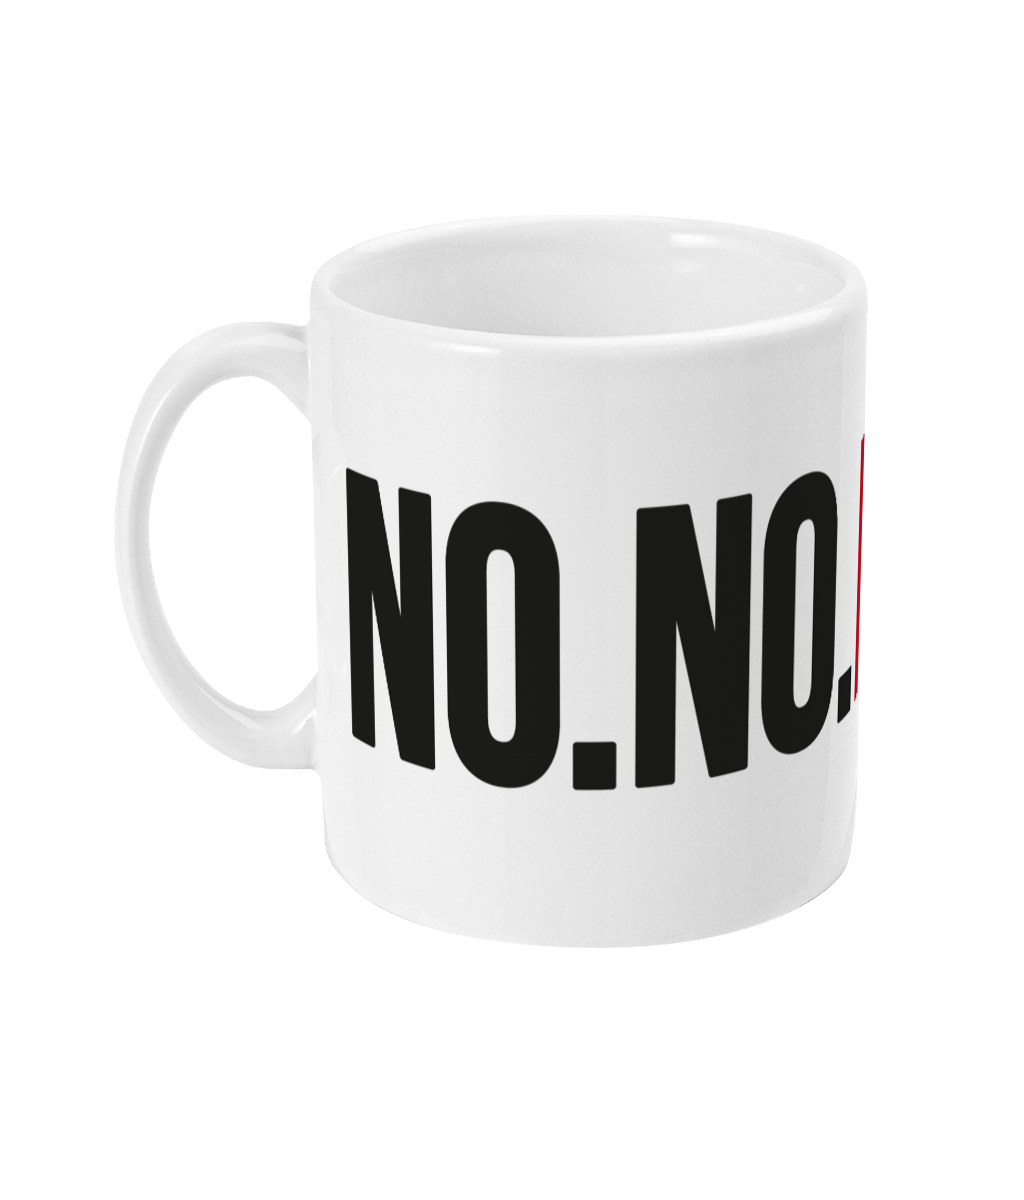 A unique mug featuring bold statement. Brighten up your desk with this bold typography design. It will make the perfect gift for someone whether it's for a birthday, Christmas or any other special occasion.    Mug reads: No. No. Nope.